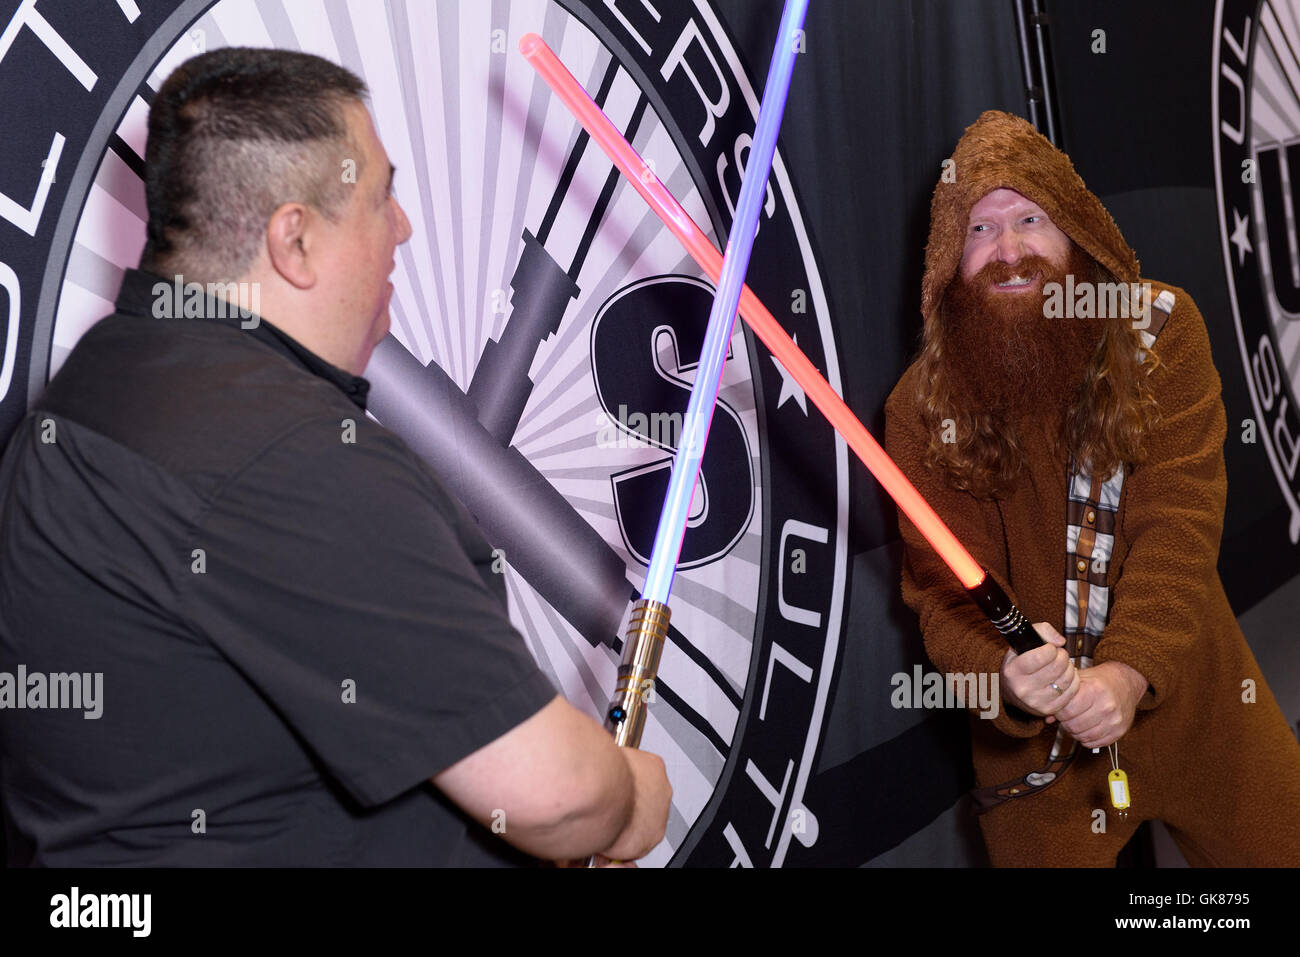 Chicago, Illinois, USA. 18th August 2016. A general view of atmosphere during the Wizard World Chicago Comic Con at Donald E. Stephens Convention Center in Rosemont, IL. Credit:  Daniel Boczarski/Alamy Live News Stock Photo